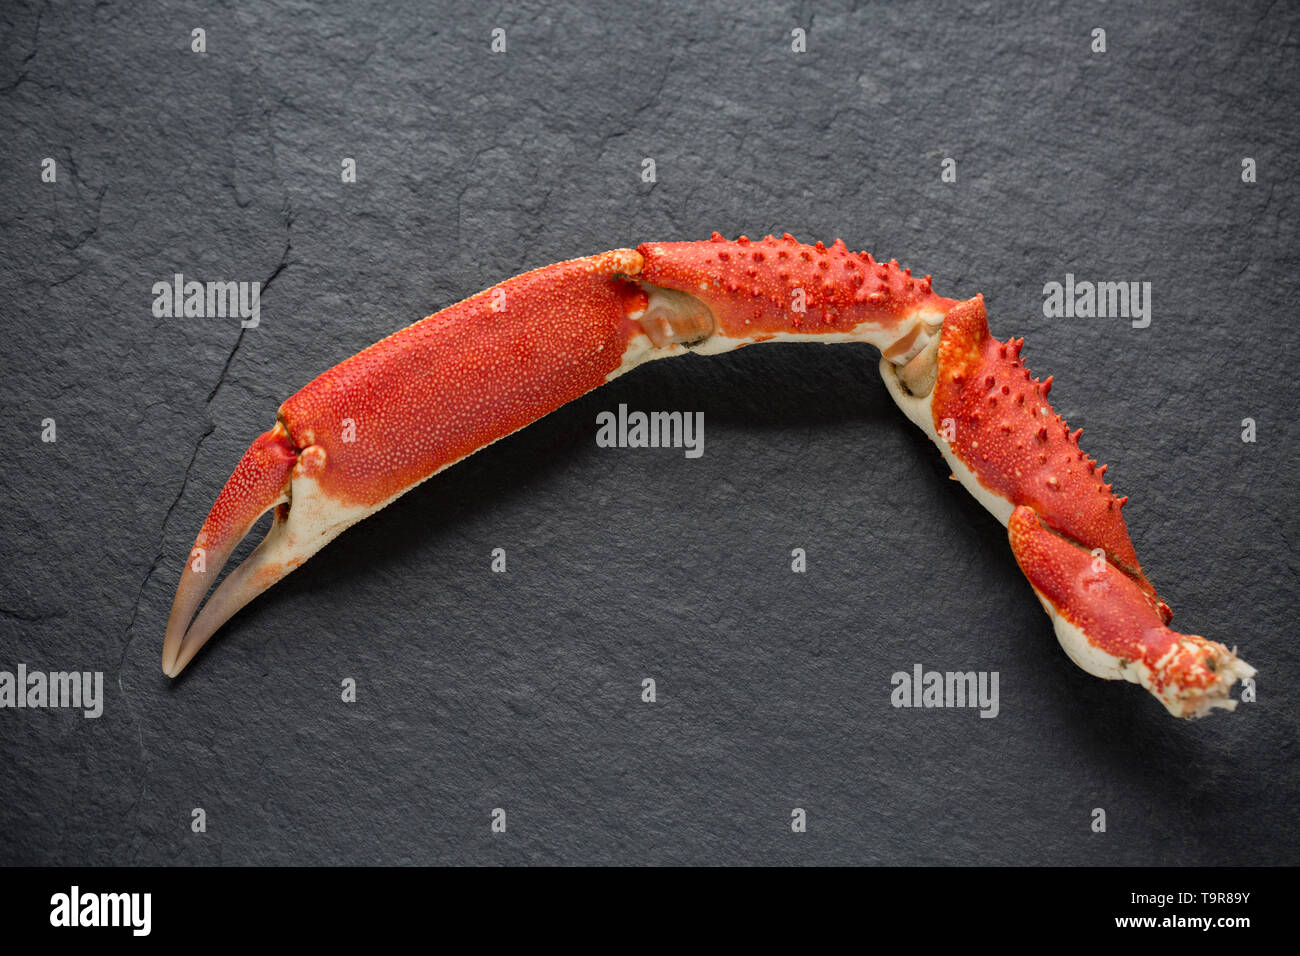 A boiled, cooked European spider crab claw, Maja brachydactyla, from a crab that was caught from a pier in the UK in a baited drop net. It has been bo Stock Photo